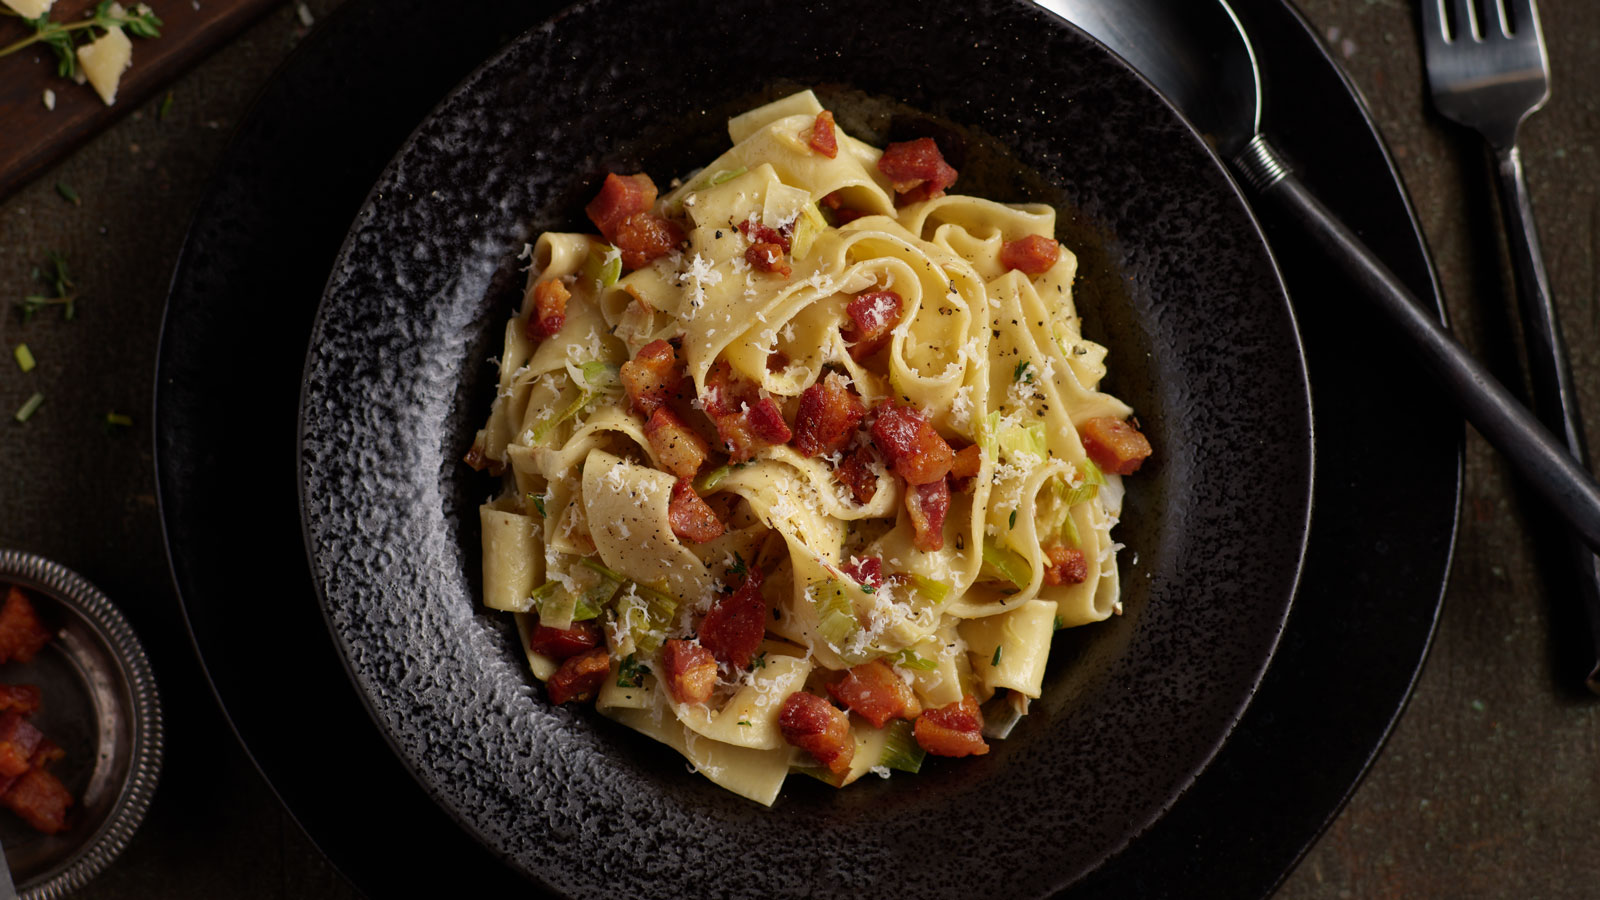 Pancetta and Creamy Leek Pappardelle